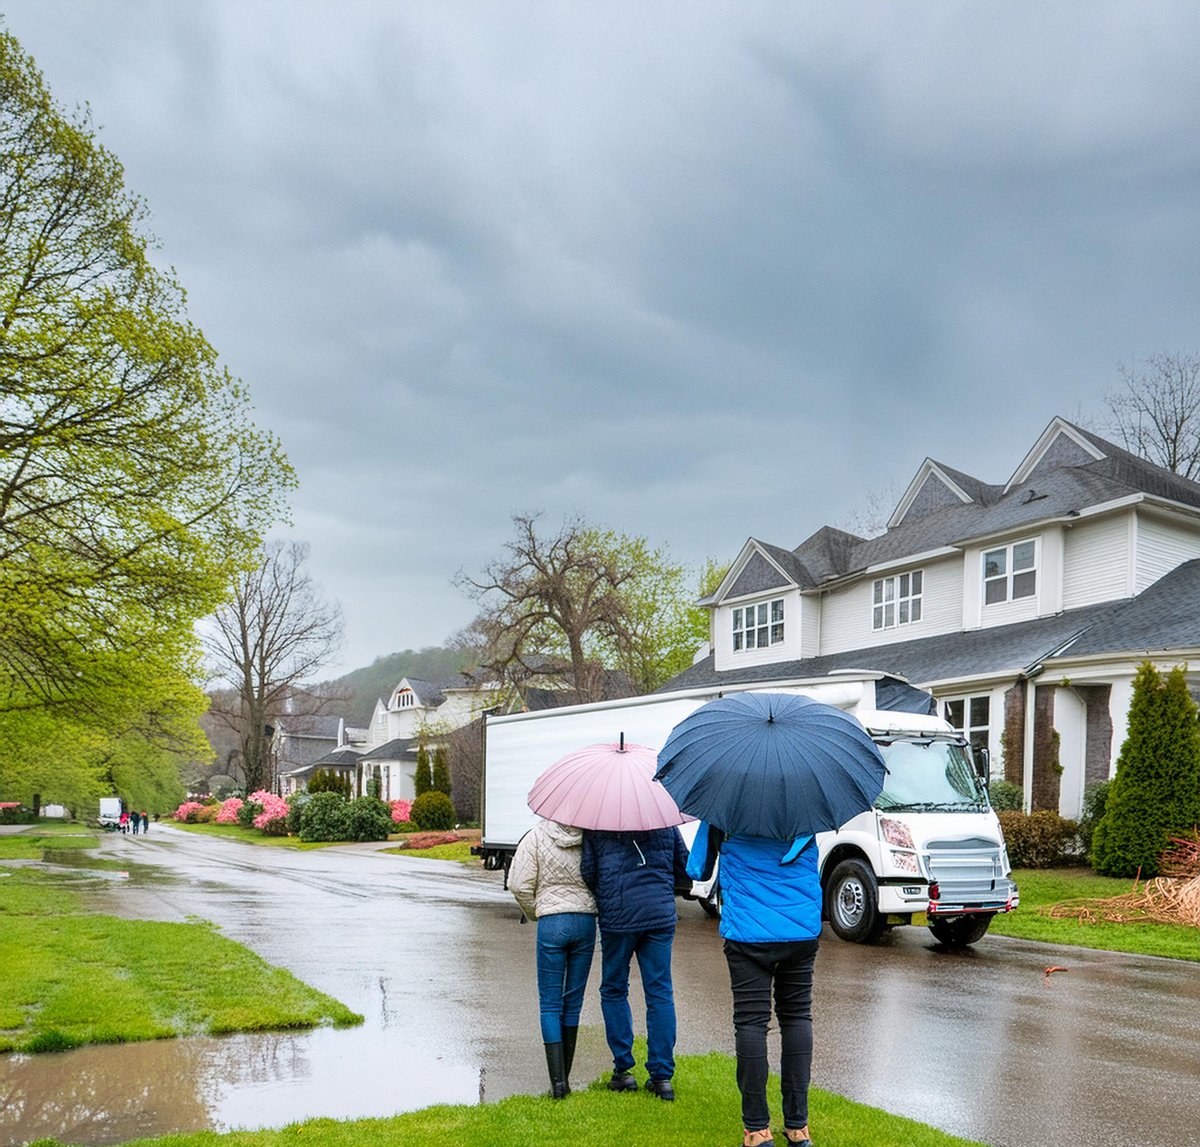 Moving in a rainstorm? 🌧️🏠 Alliance Relocation Services has your back! 💪🏠🚚 From waterproof tips to non-slip footwear, we've got you covered. ☔️👟 Don't let the rain dampen your moving day spirit! #AllianceRelocationServices #MovingTips #RainyDays #SmoothMoves